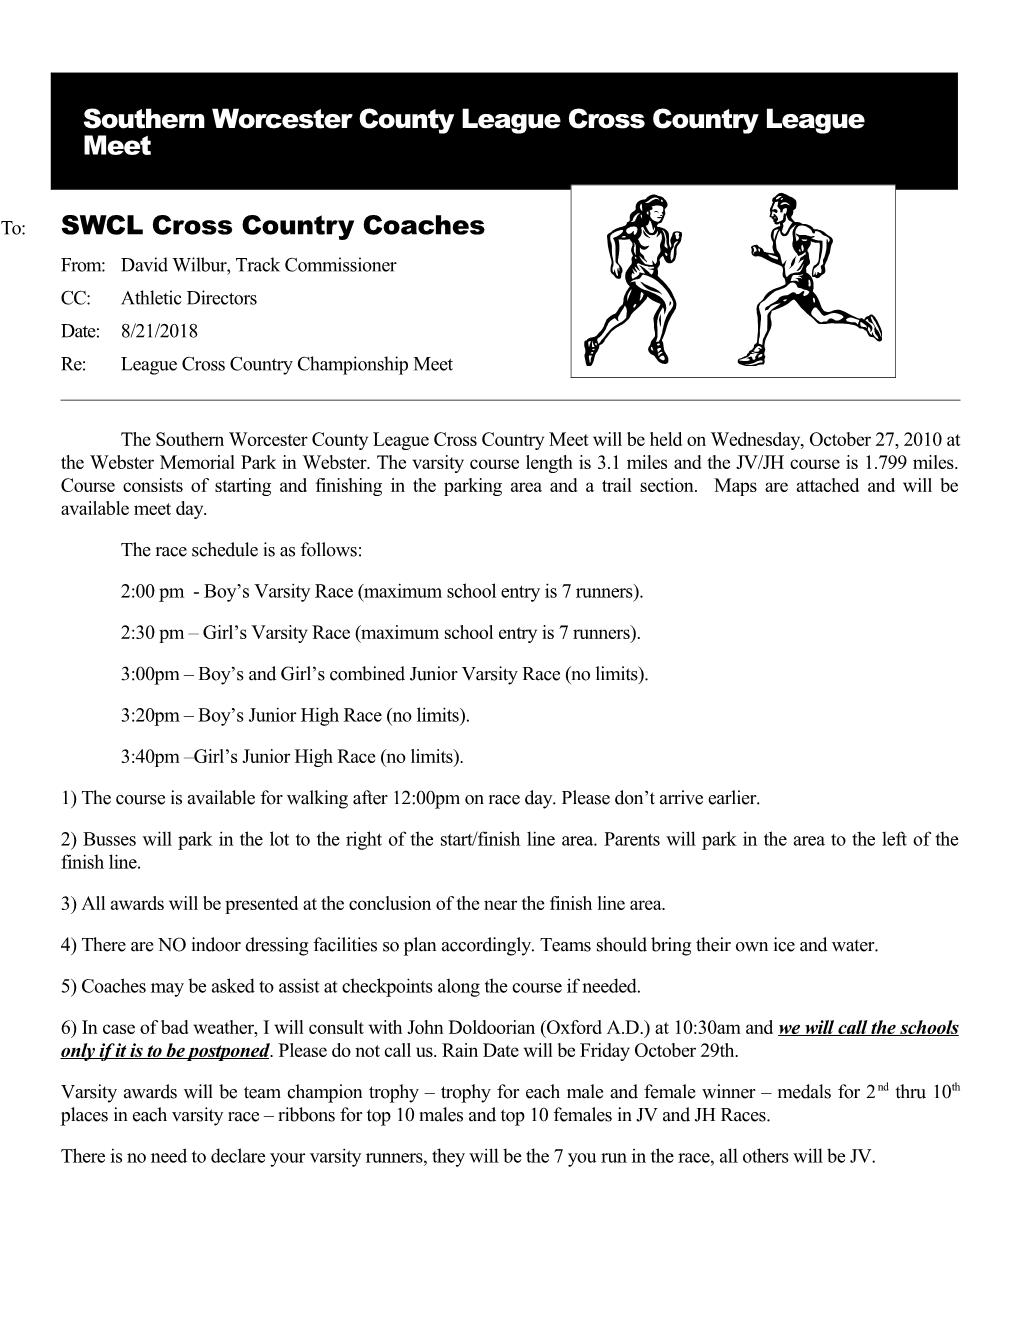 Southern Worcester County League Cross Country League Meet